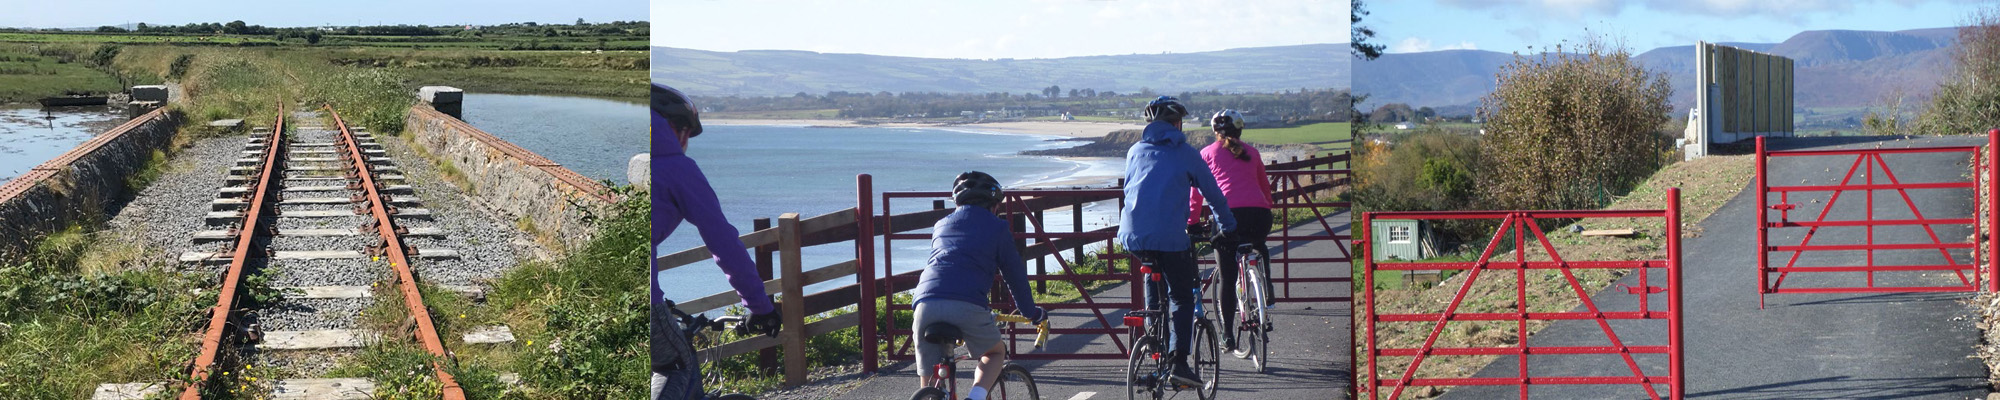 West Clare Greenway